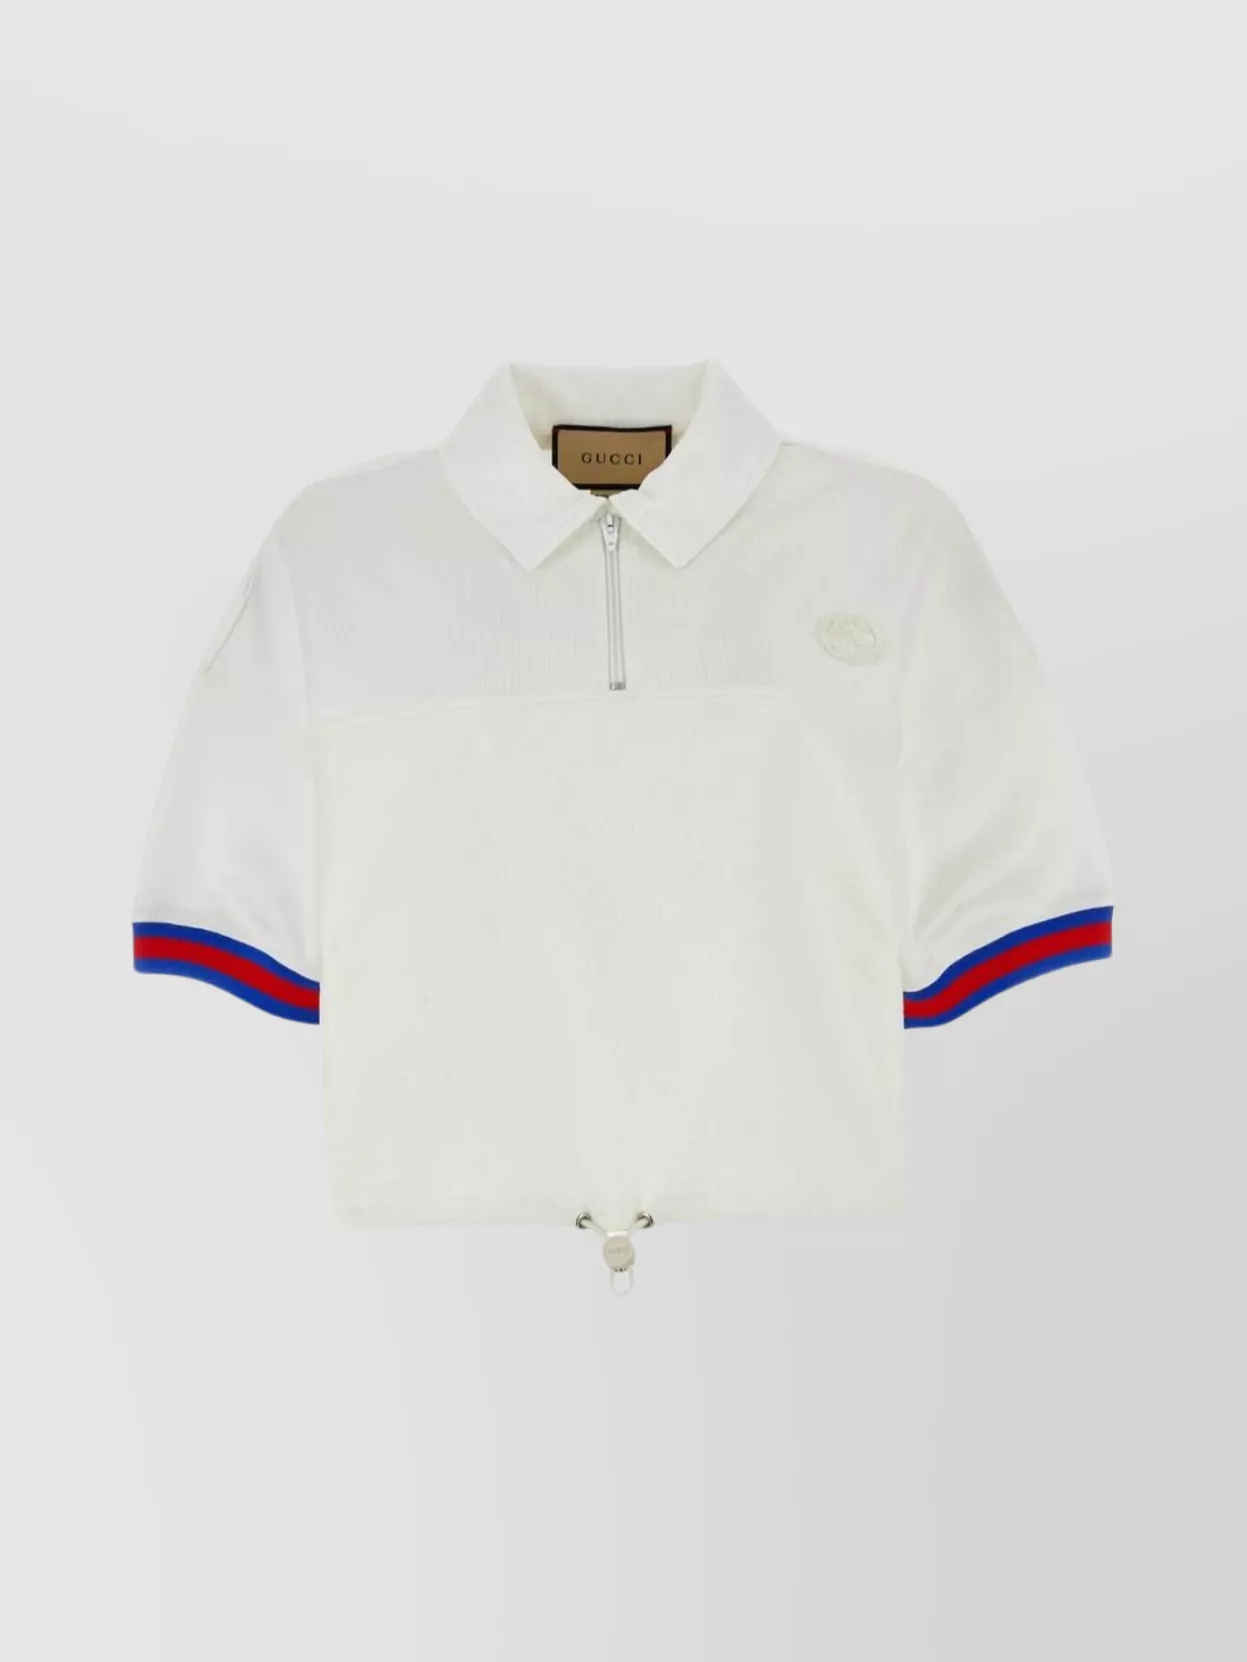 GUCCI STRETCH JERSEY AND COTTON POLO SHIRT